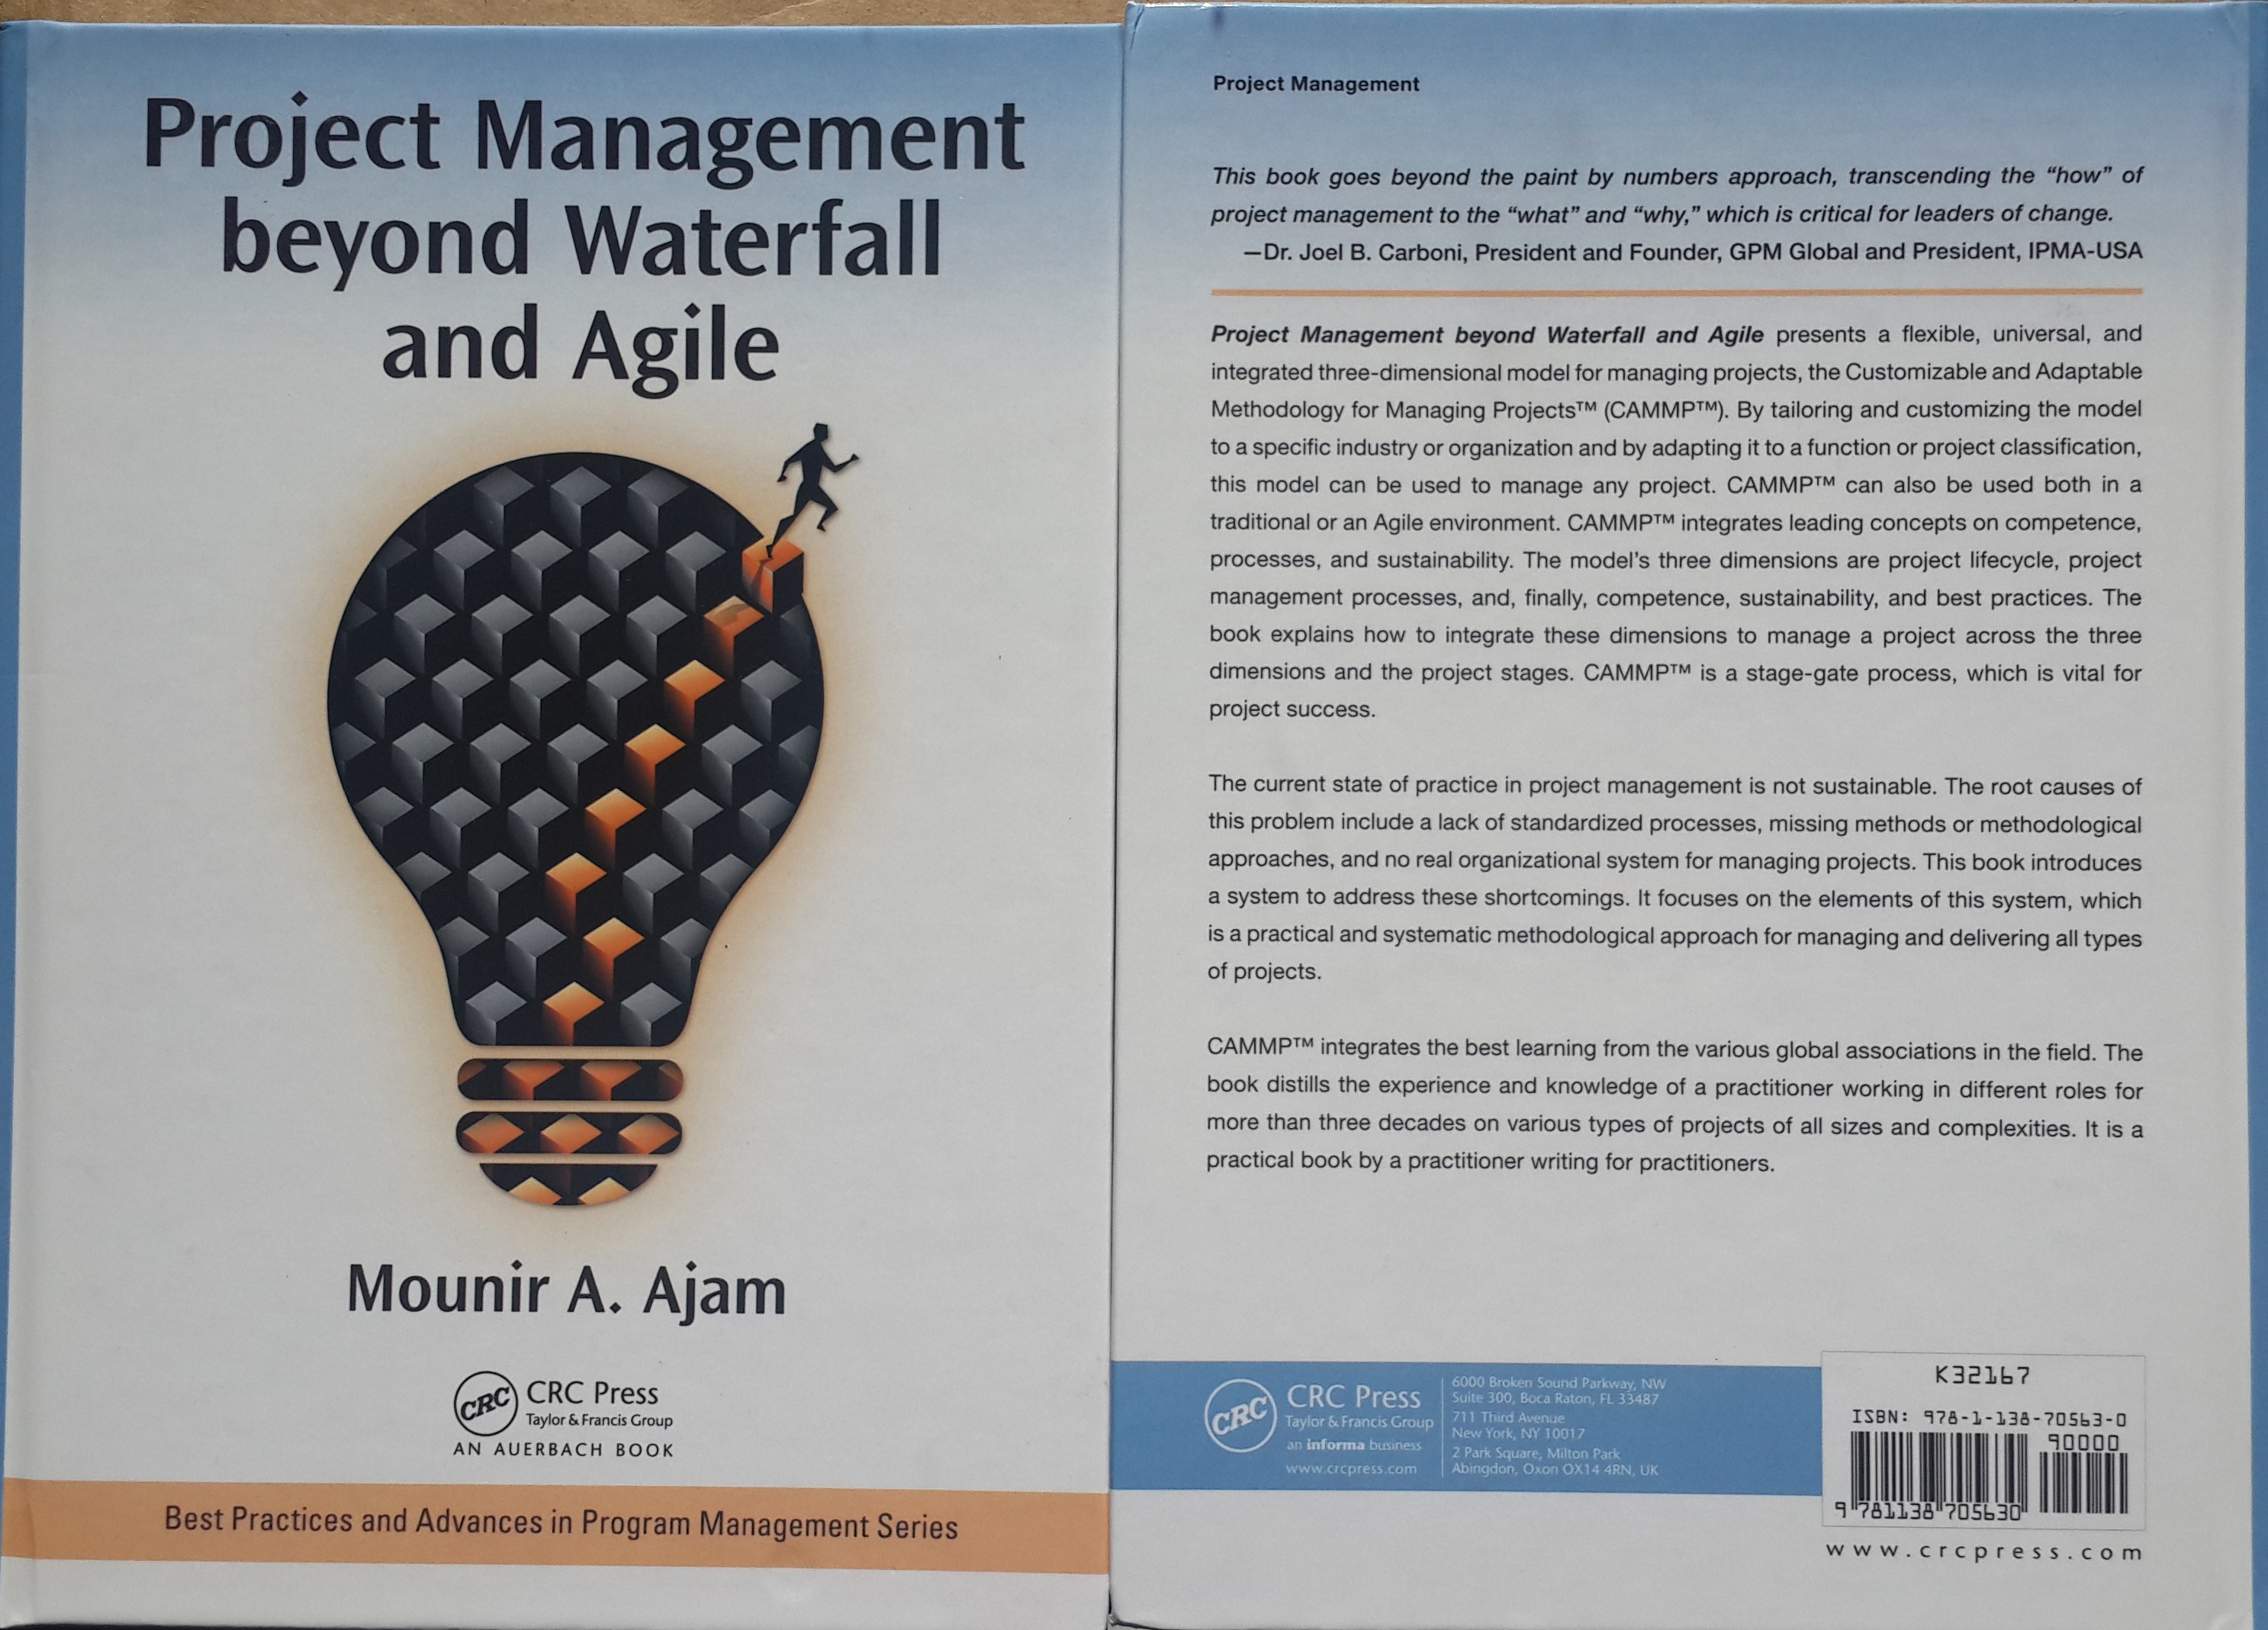 Adaptive Project Management, Adaptive is not Agile, beyond Waterfall and Agile